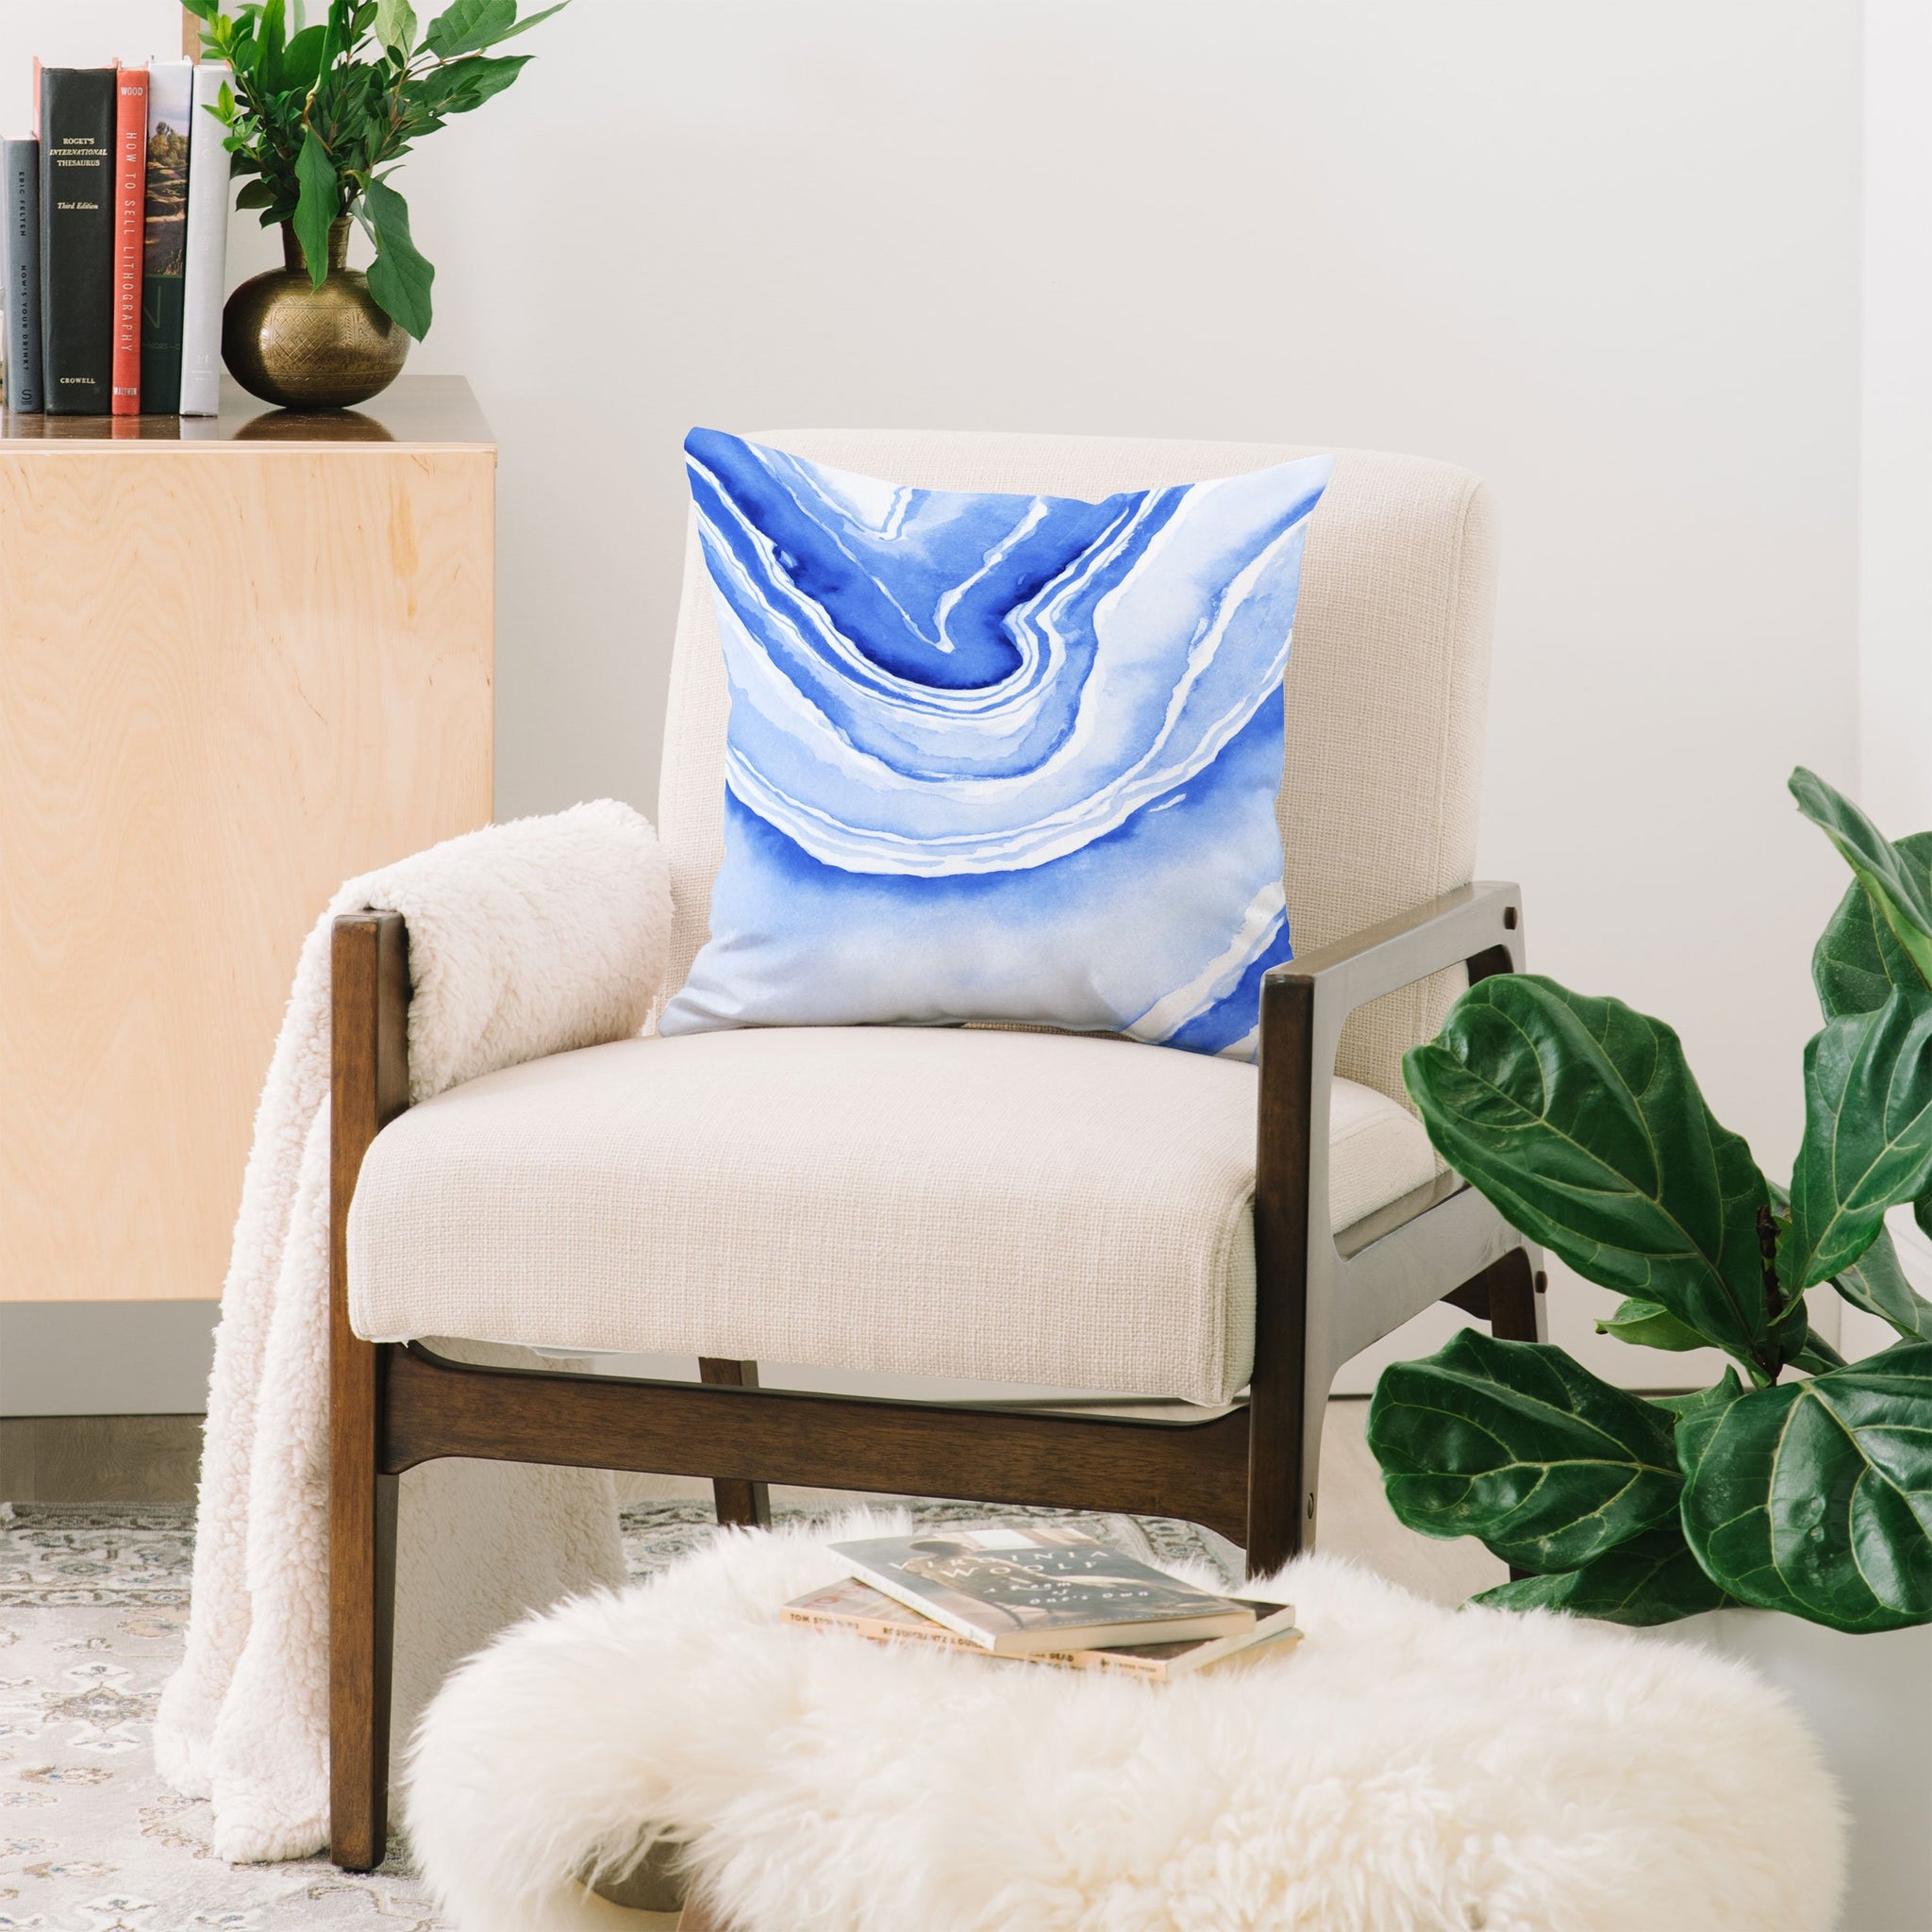 Blue Lace Agate Throw Pillow